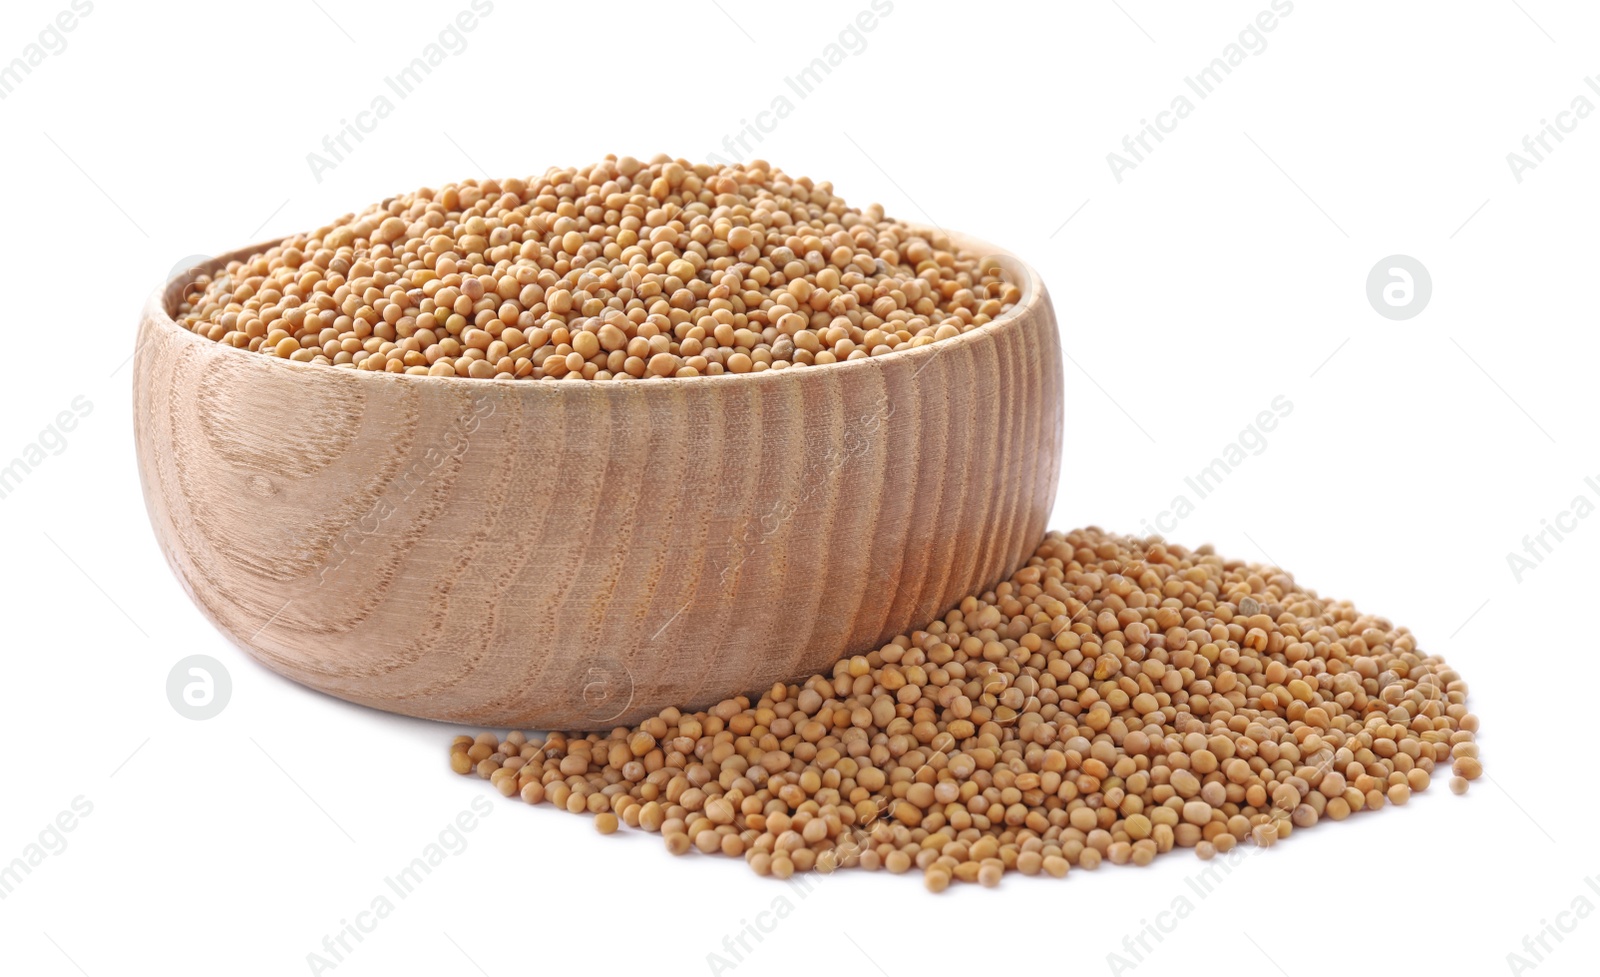 Photo of Mustard seeds with wooden bowl isolated on white